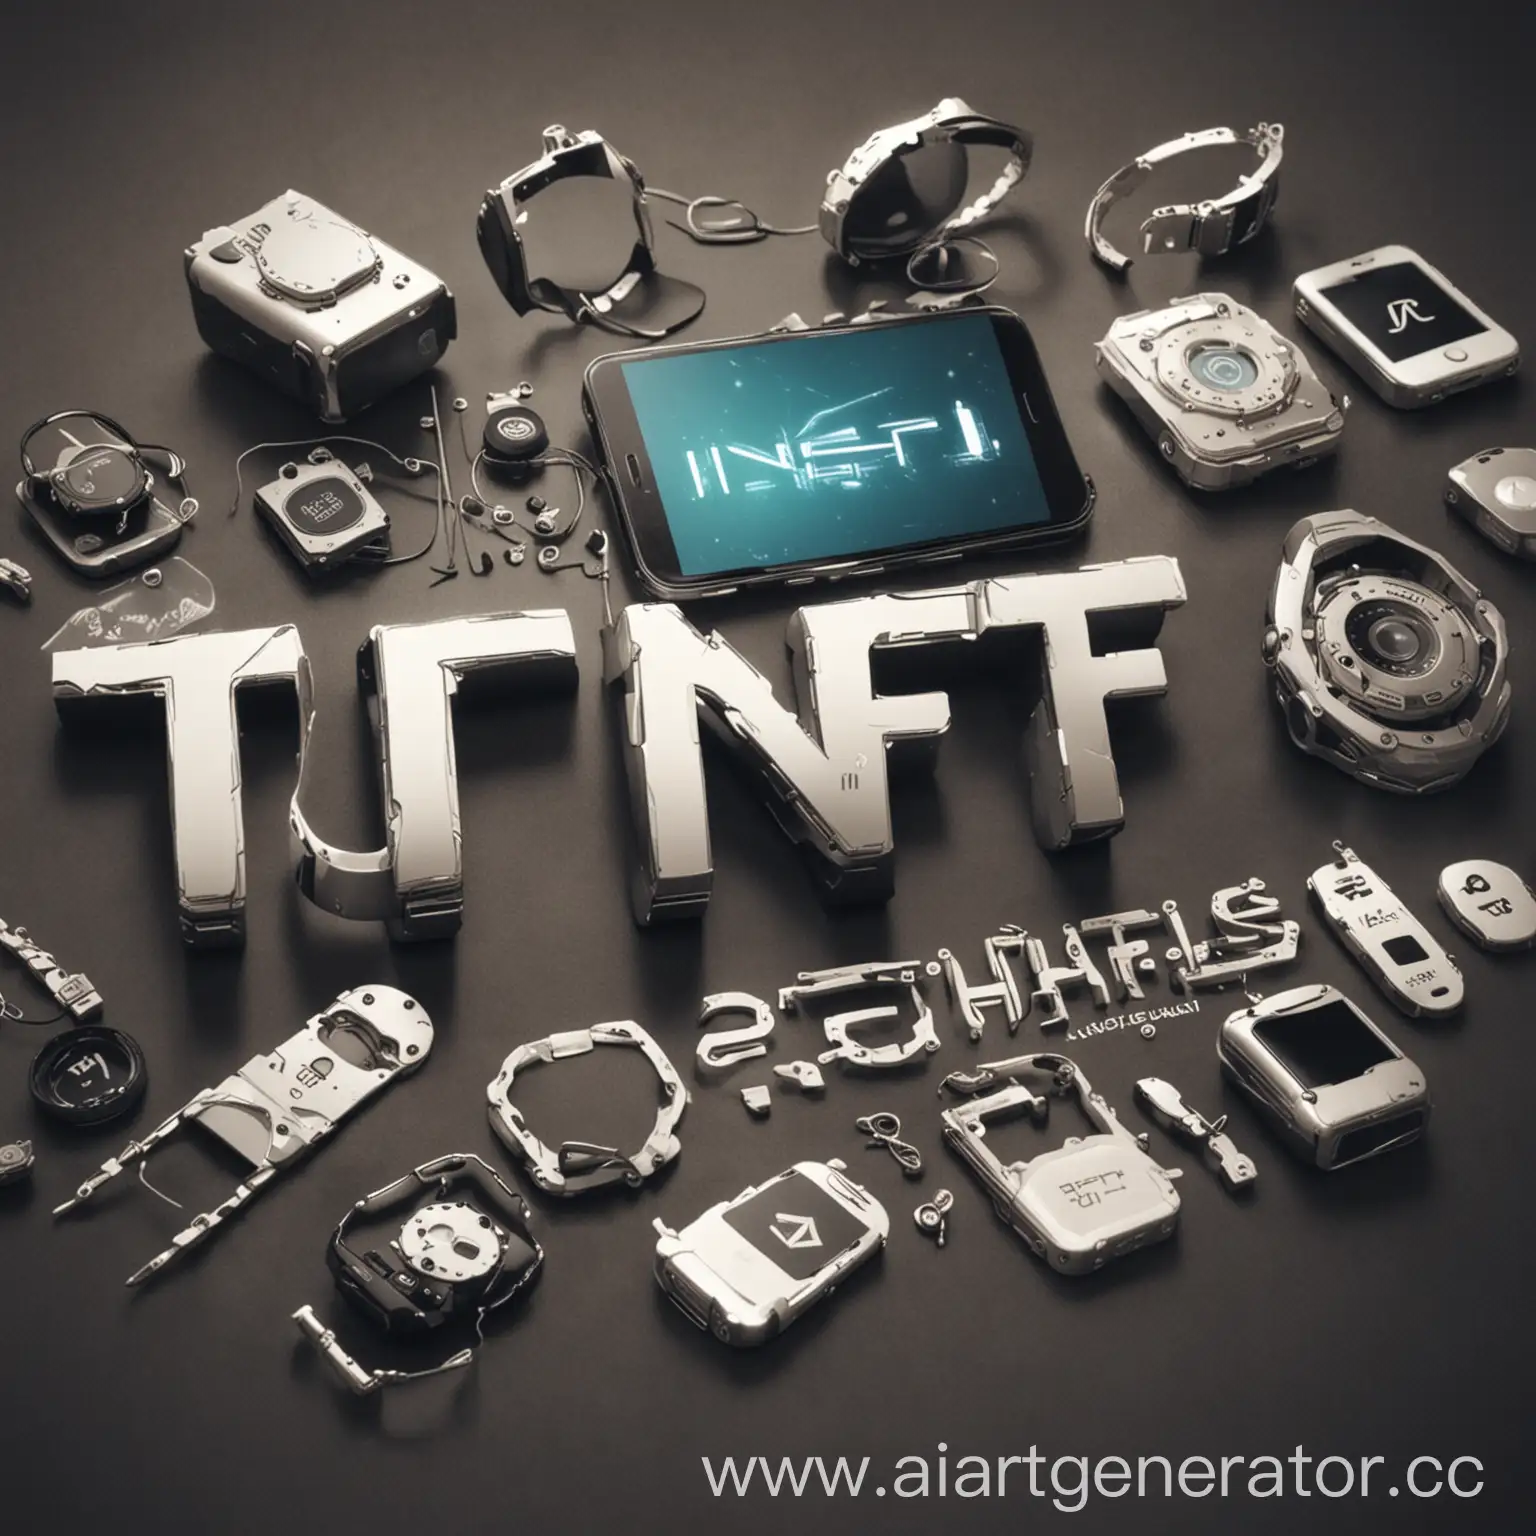 Create a logo for my NFT Collection which named "TON TECHNOLOGIES", there some gadget, iPhones, watches and other interesting technologies in background.